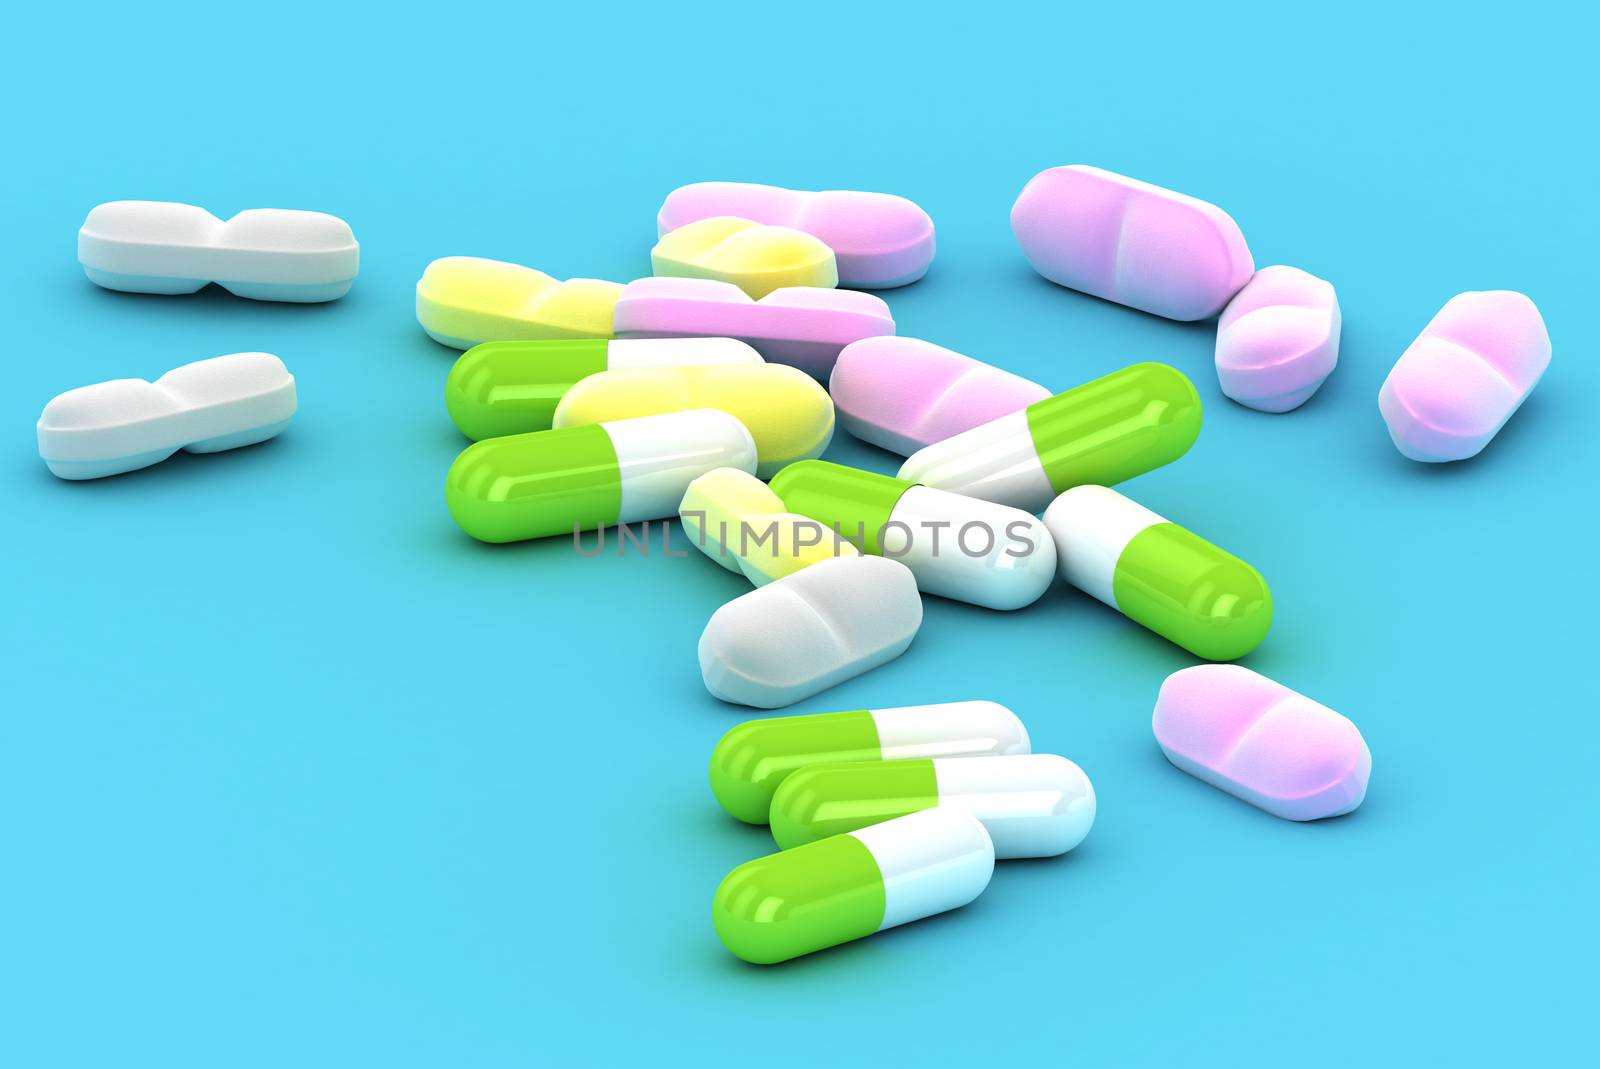 A Group of Medical Pills on a blue background by head-off